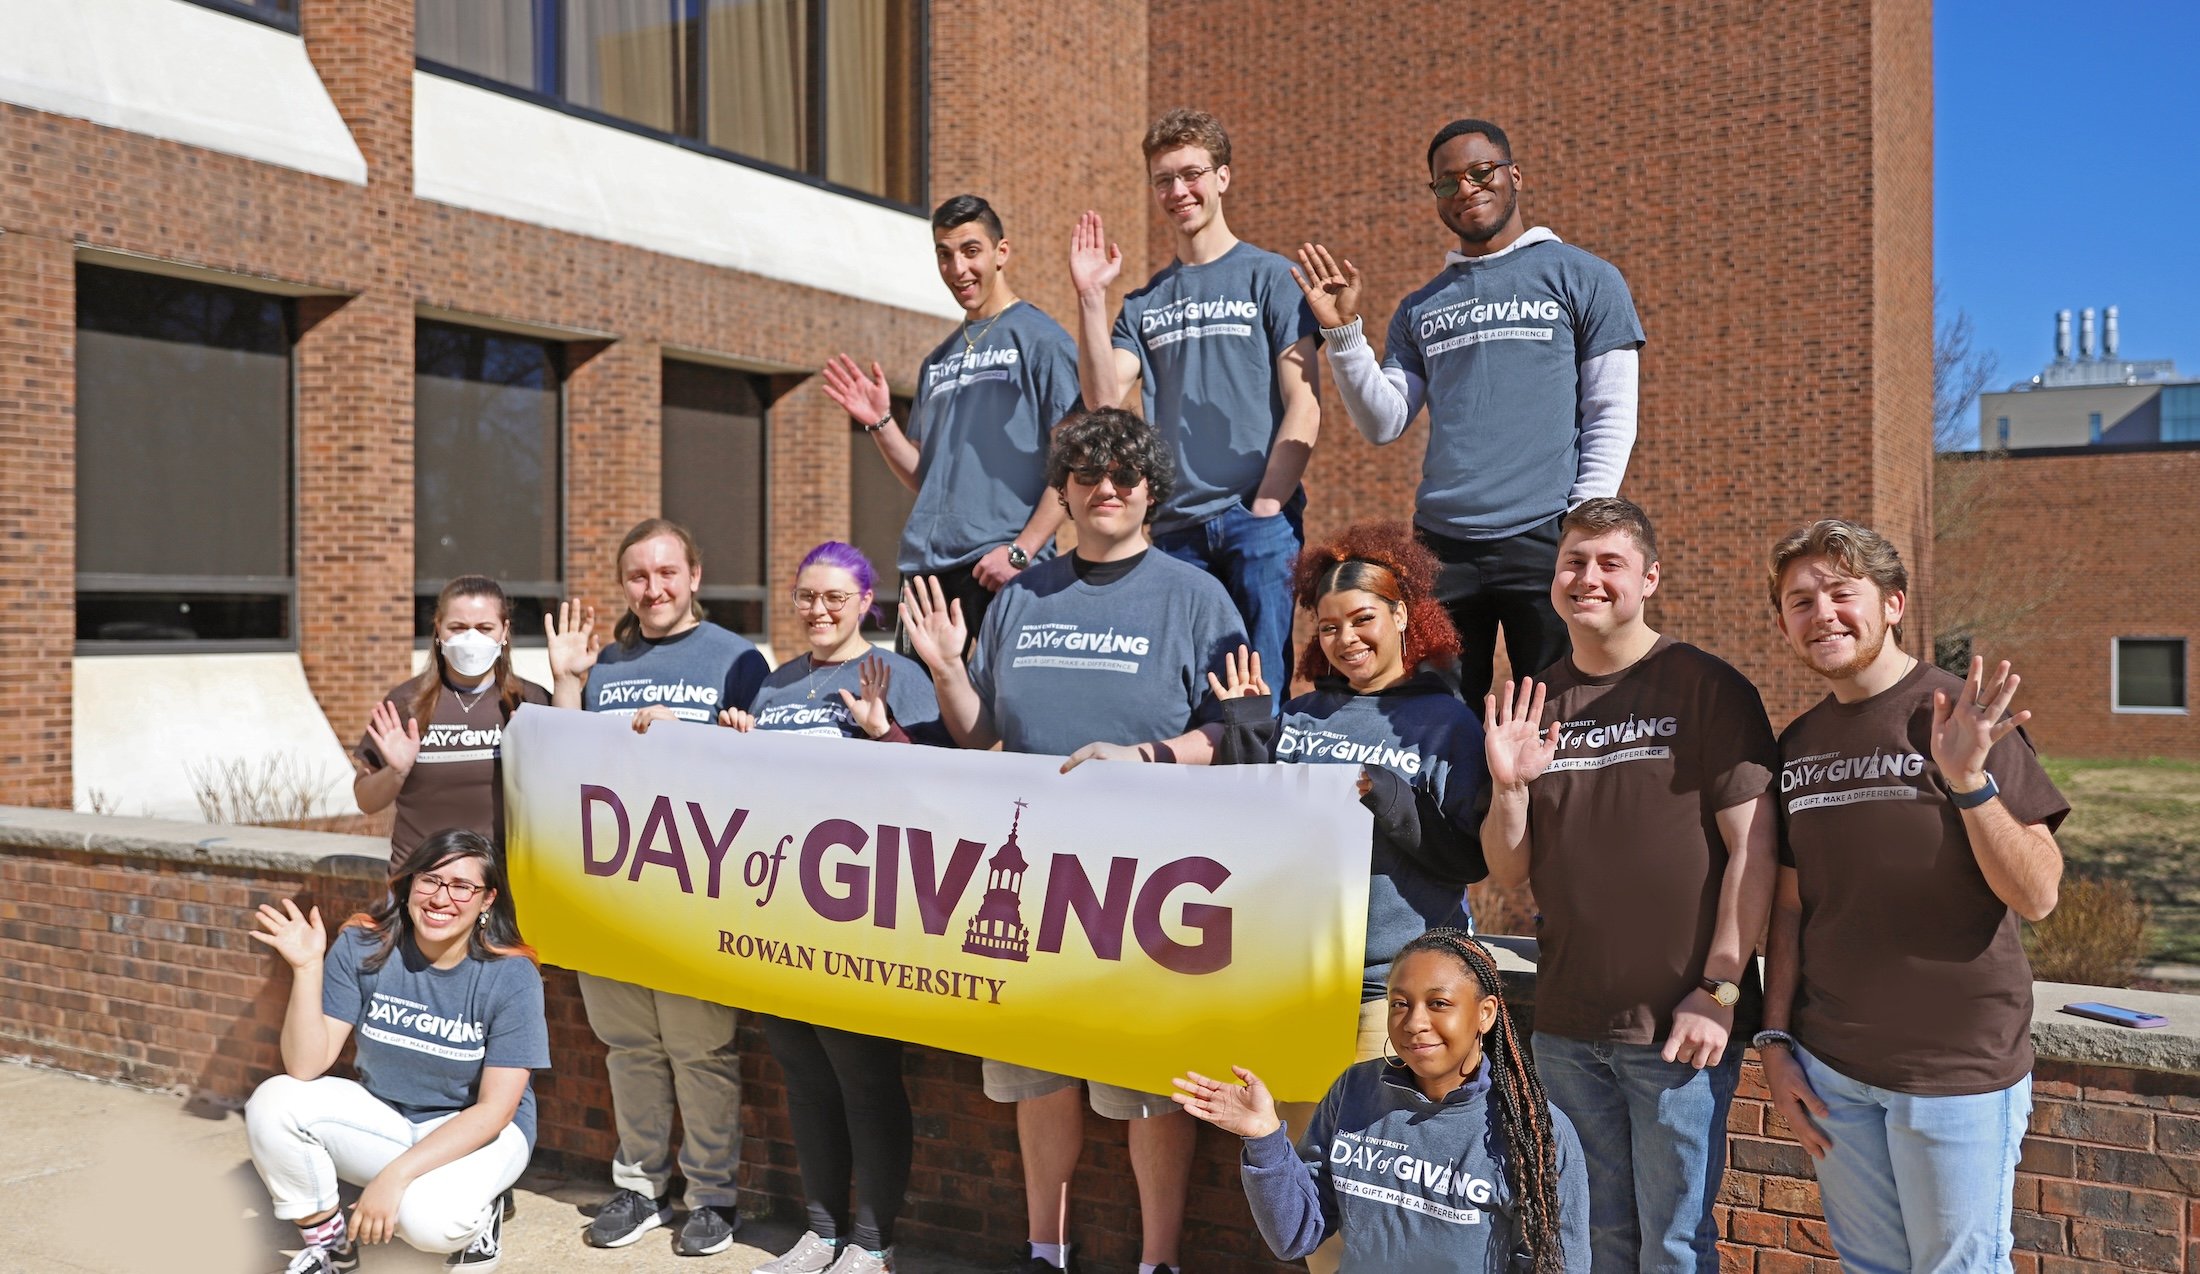 A group of Rowan University students holding a day of giving banner.